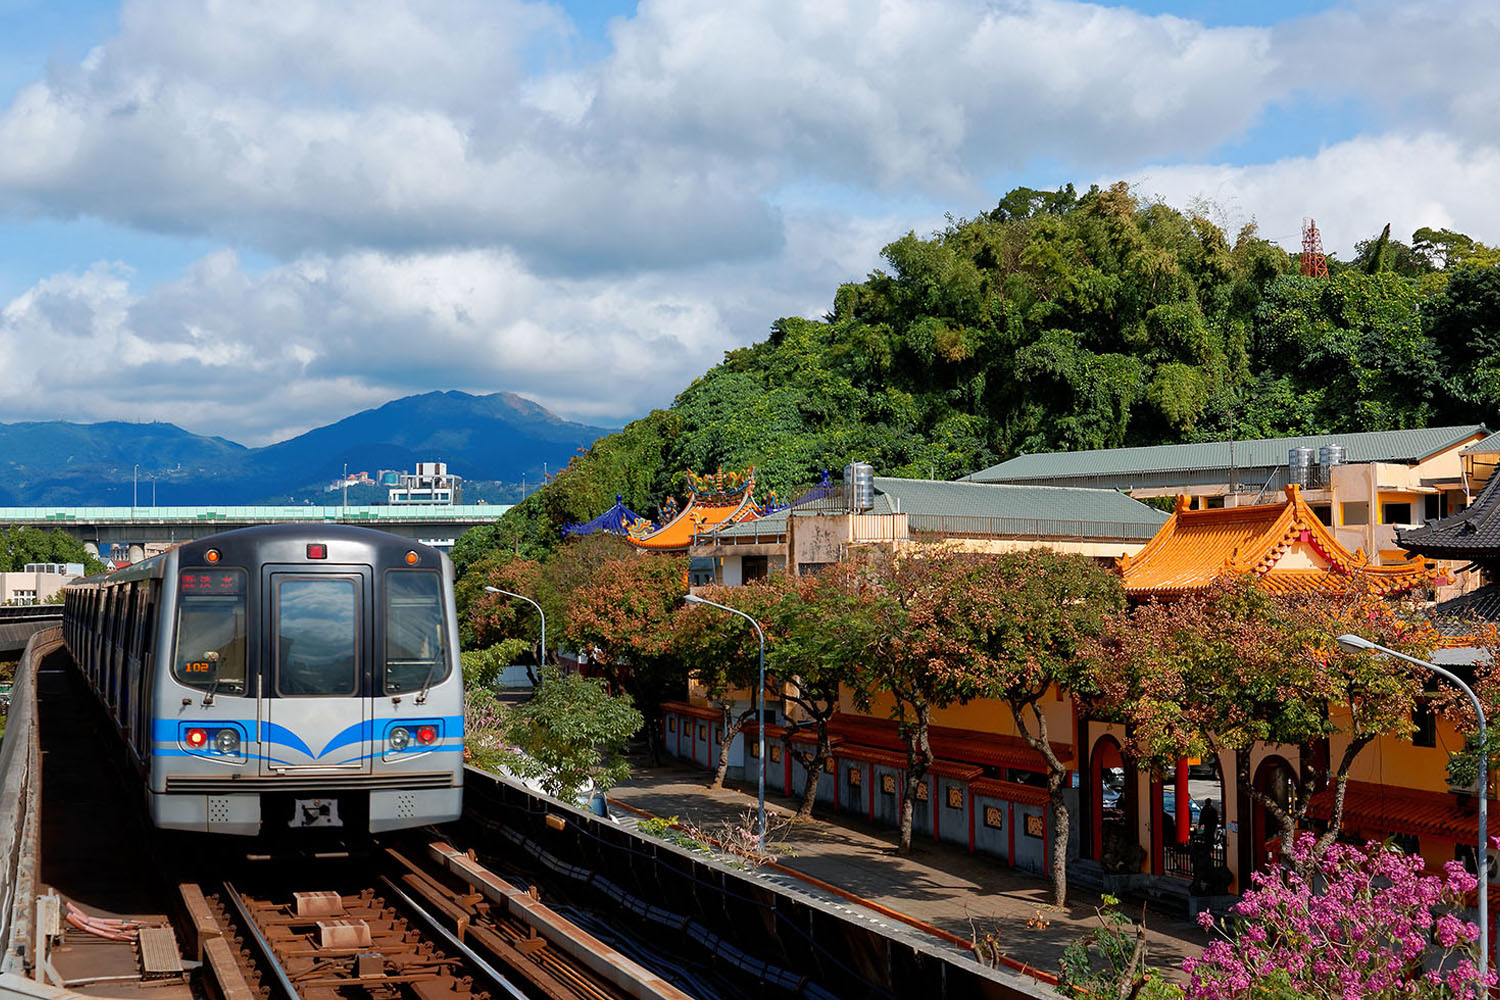 A metro Train traveling on elevated rails of Taipei MRT System by the architecture of a Buddhist temple near Yuanshan station with mountains in background on a sunny cloudy day in Taipei, Taiwan; Shutterstock ID 794476882; purchase_order: -; job: -; client: -; other: -